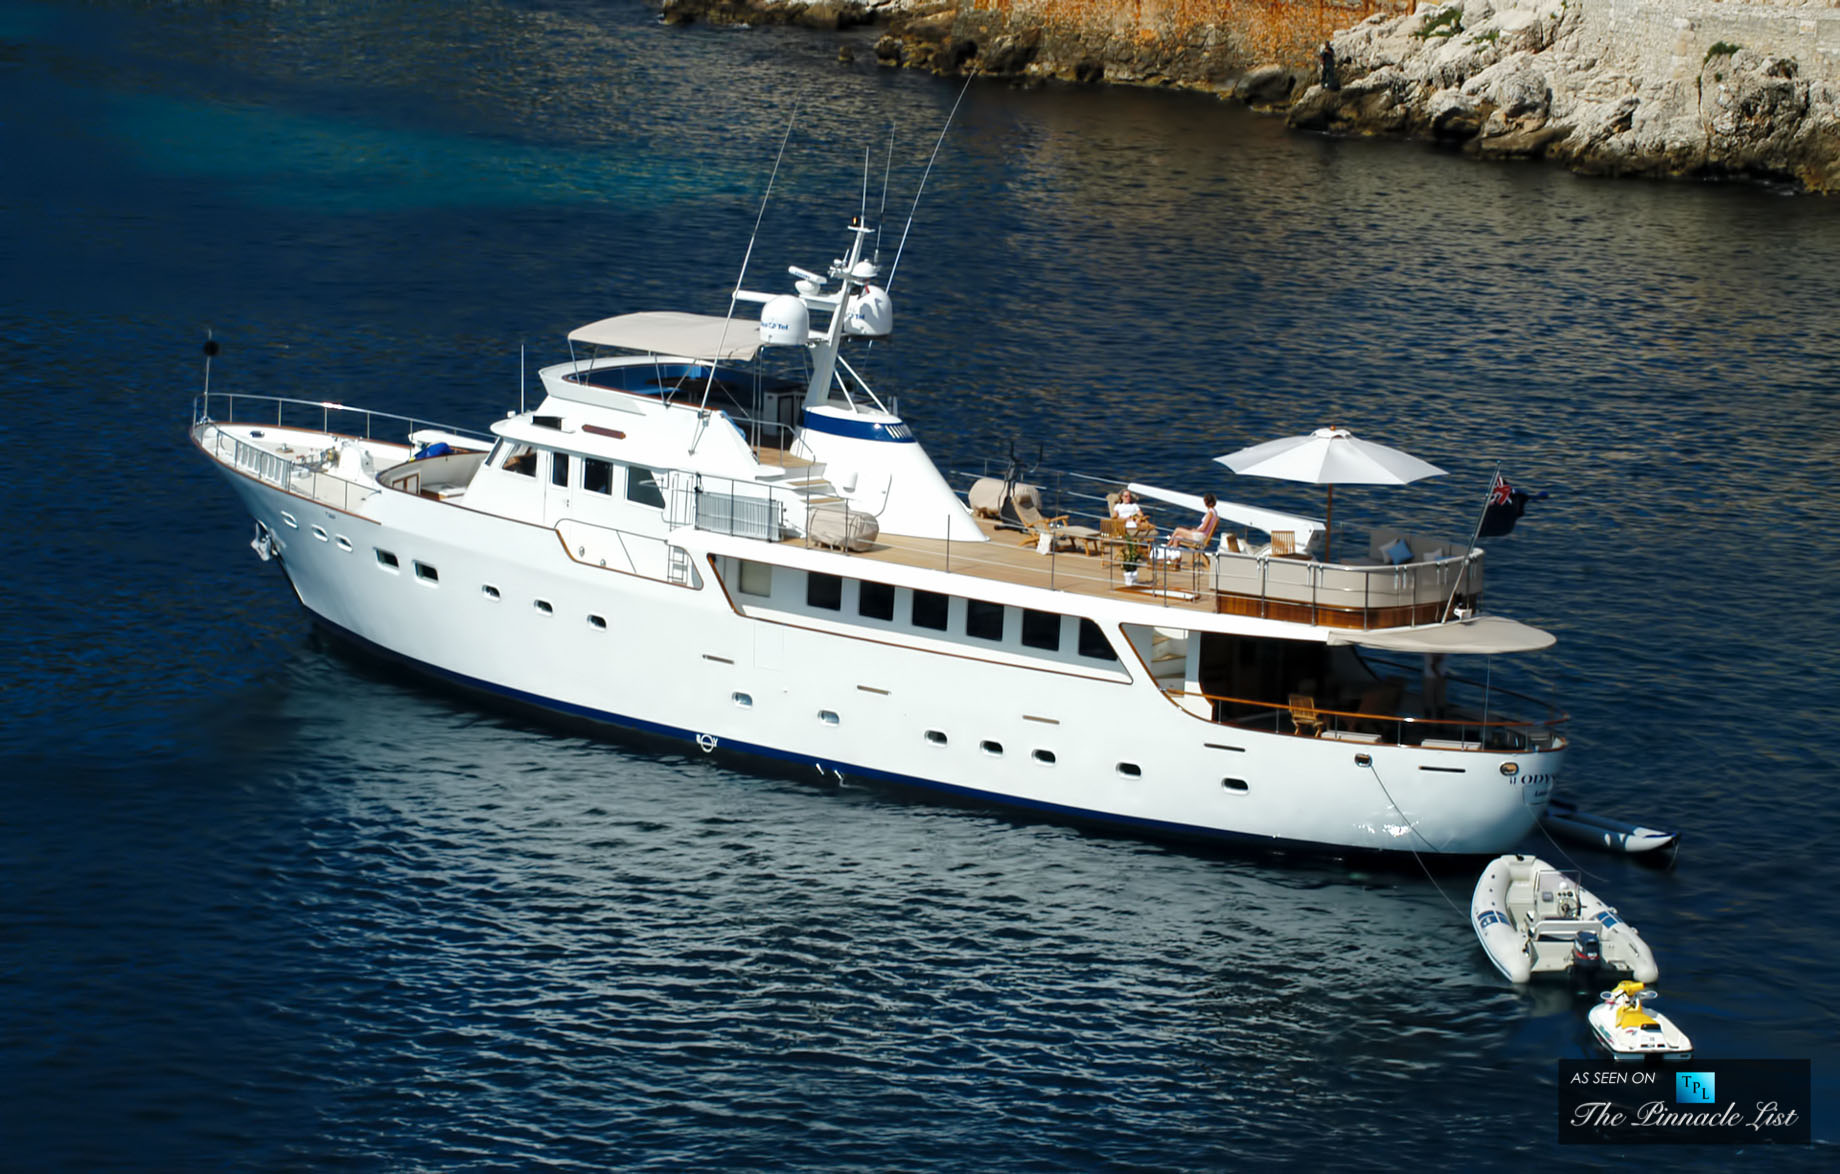 Il Odissey – Four Classic Superyachts Offering Timeless Elegance and Modern Comfort